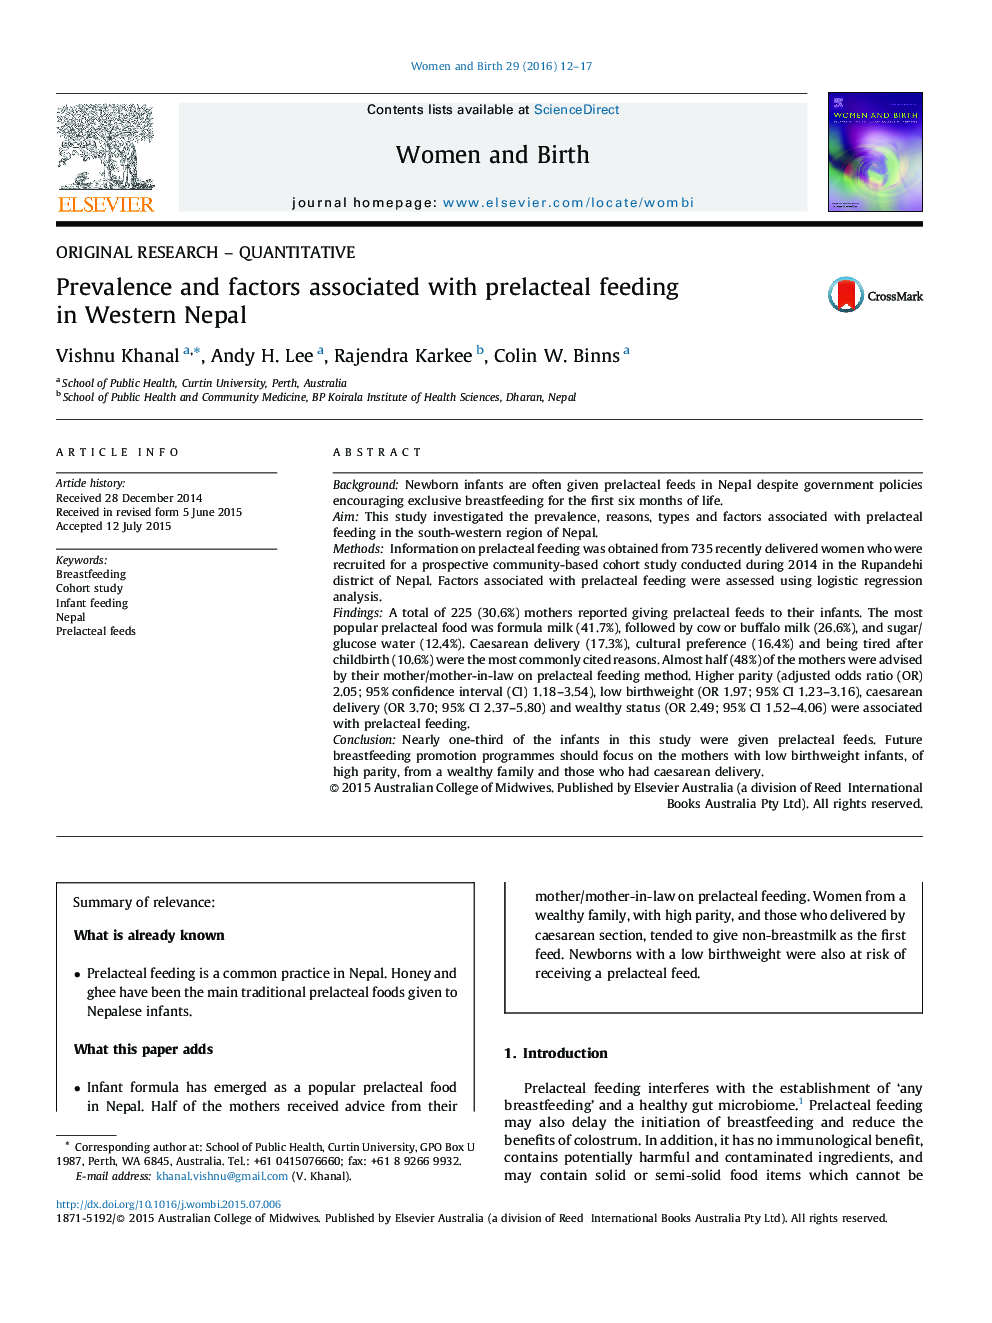 Prevalence and factors associated with prelacteal feeding in Western Nepal